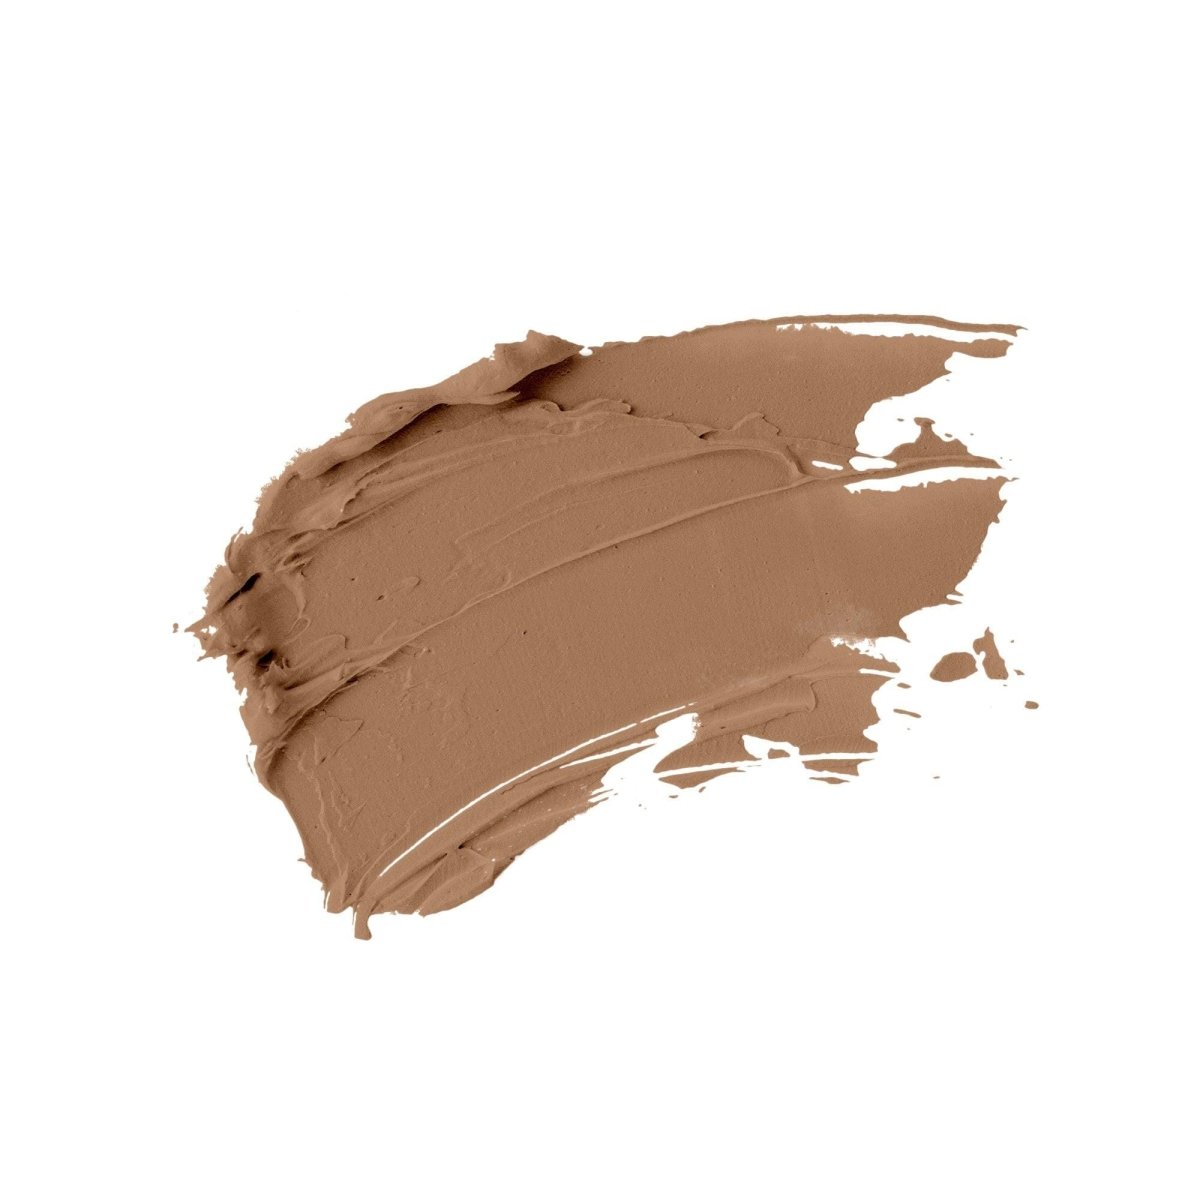 swatch of porcelain natural liquid foundation on a white background